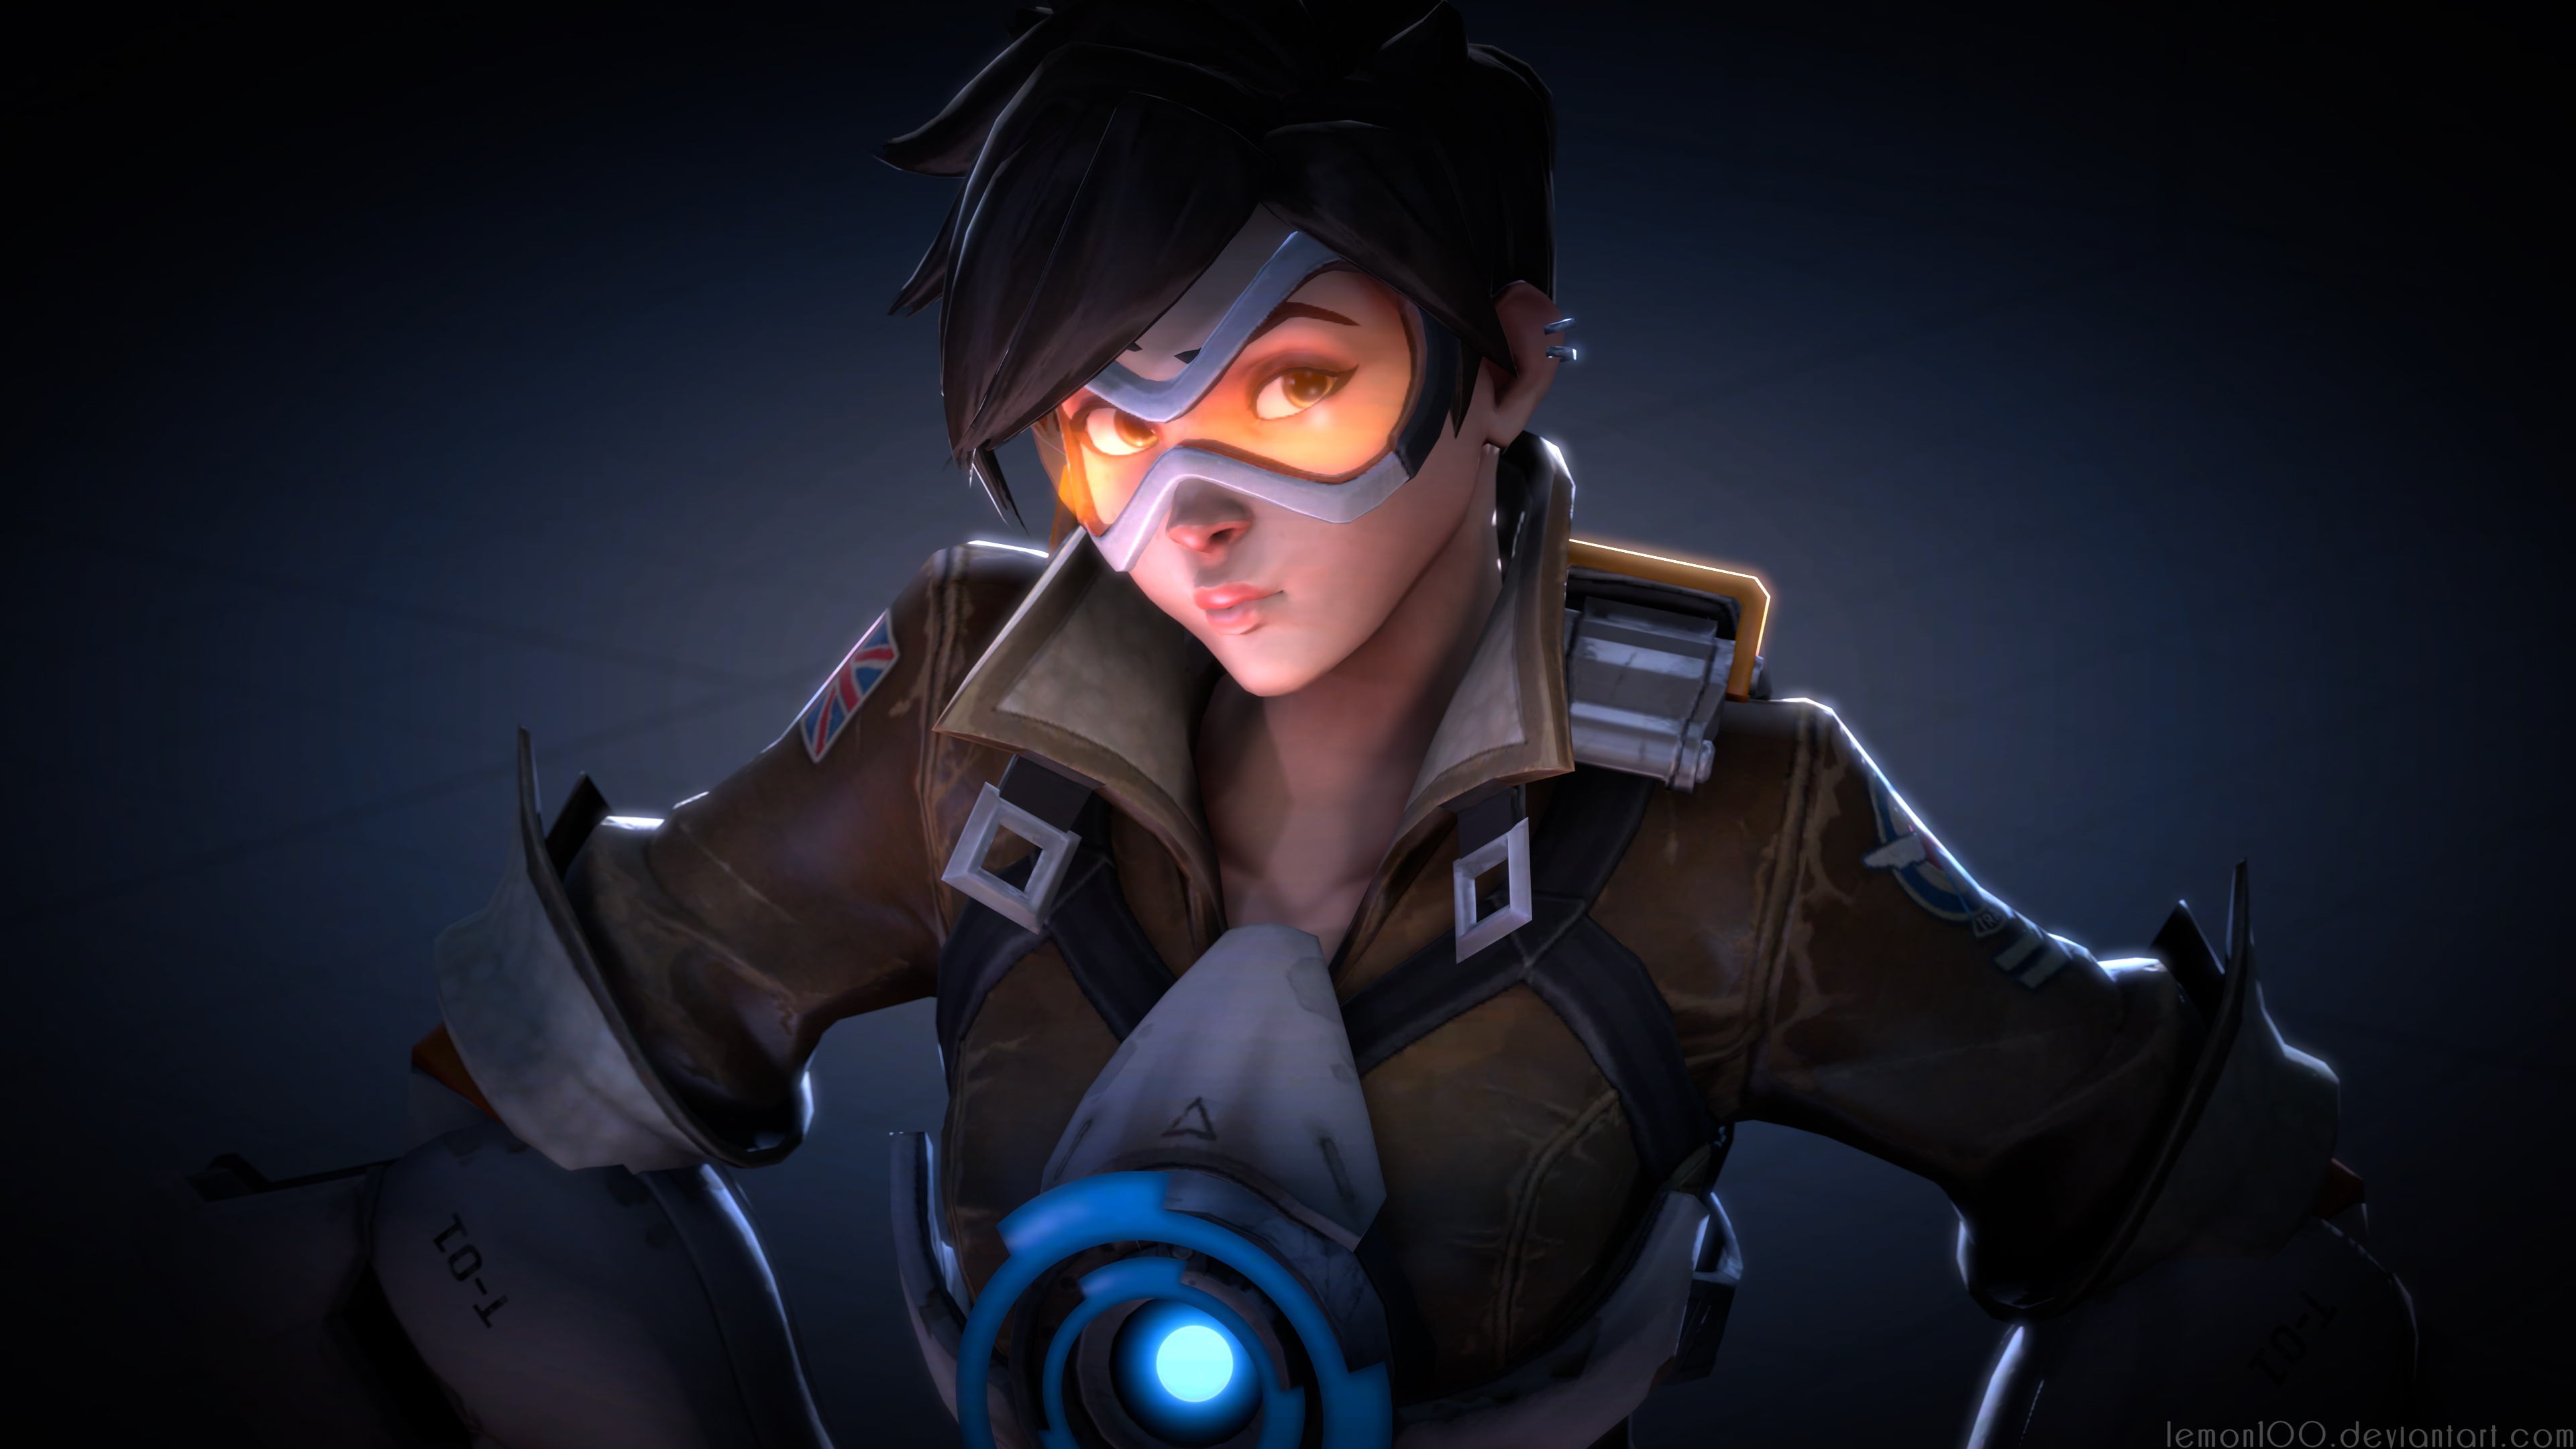 3840x2160 470+ Tracer (Overwatch) HD Wallpapers and Backgrounds